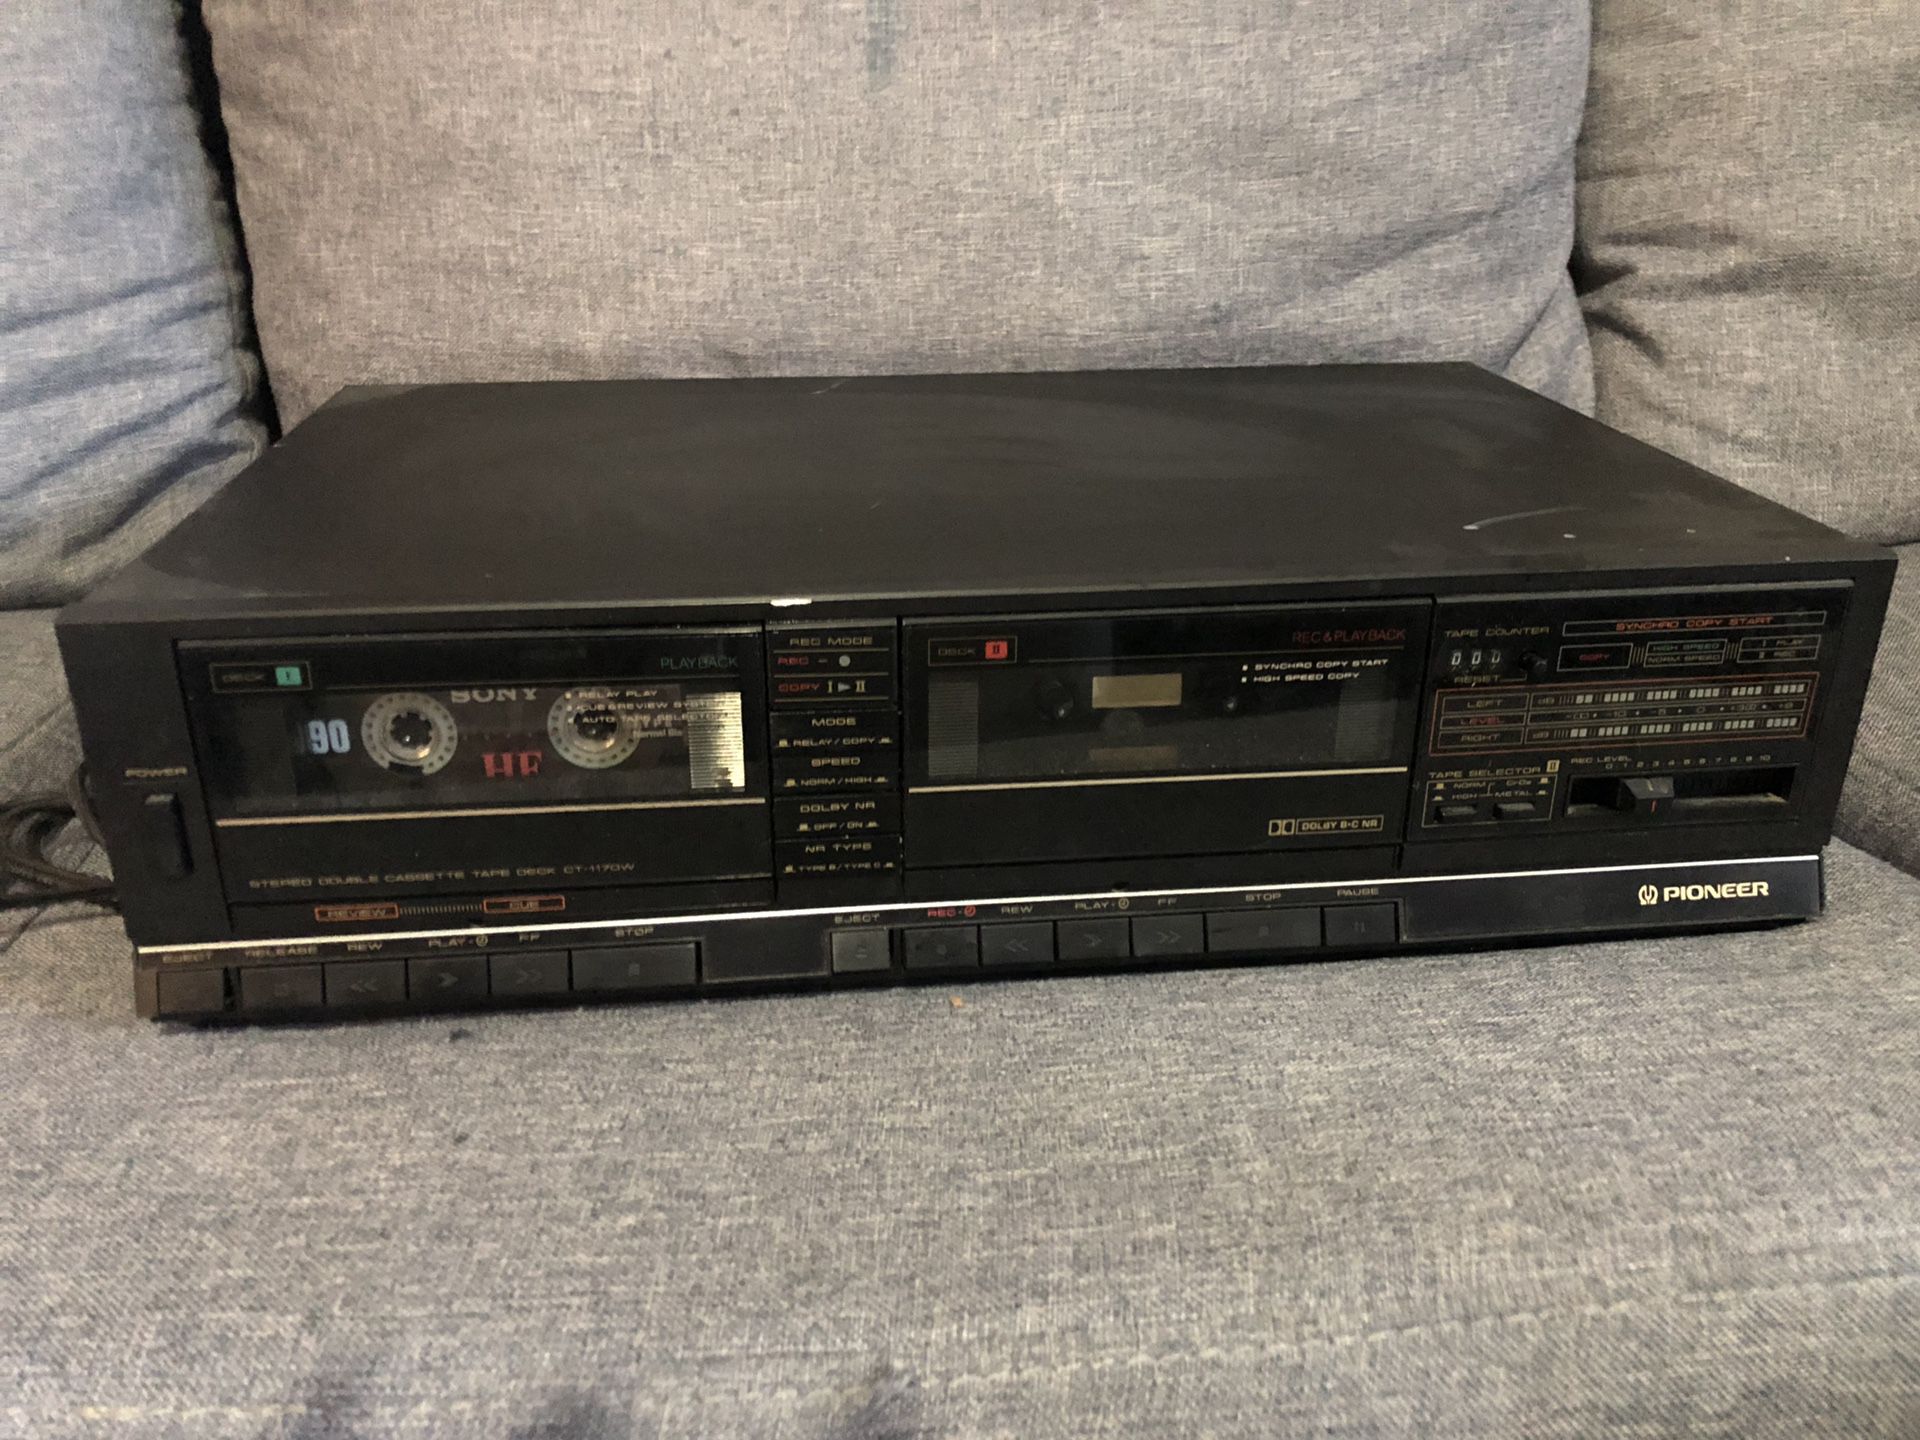 PIONEER CT-1170W DOUBLE CASSETTE PLAYER